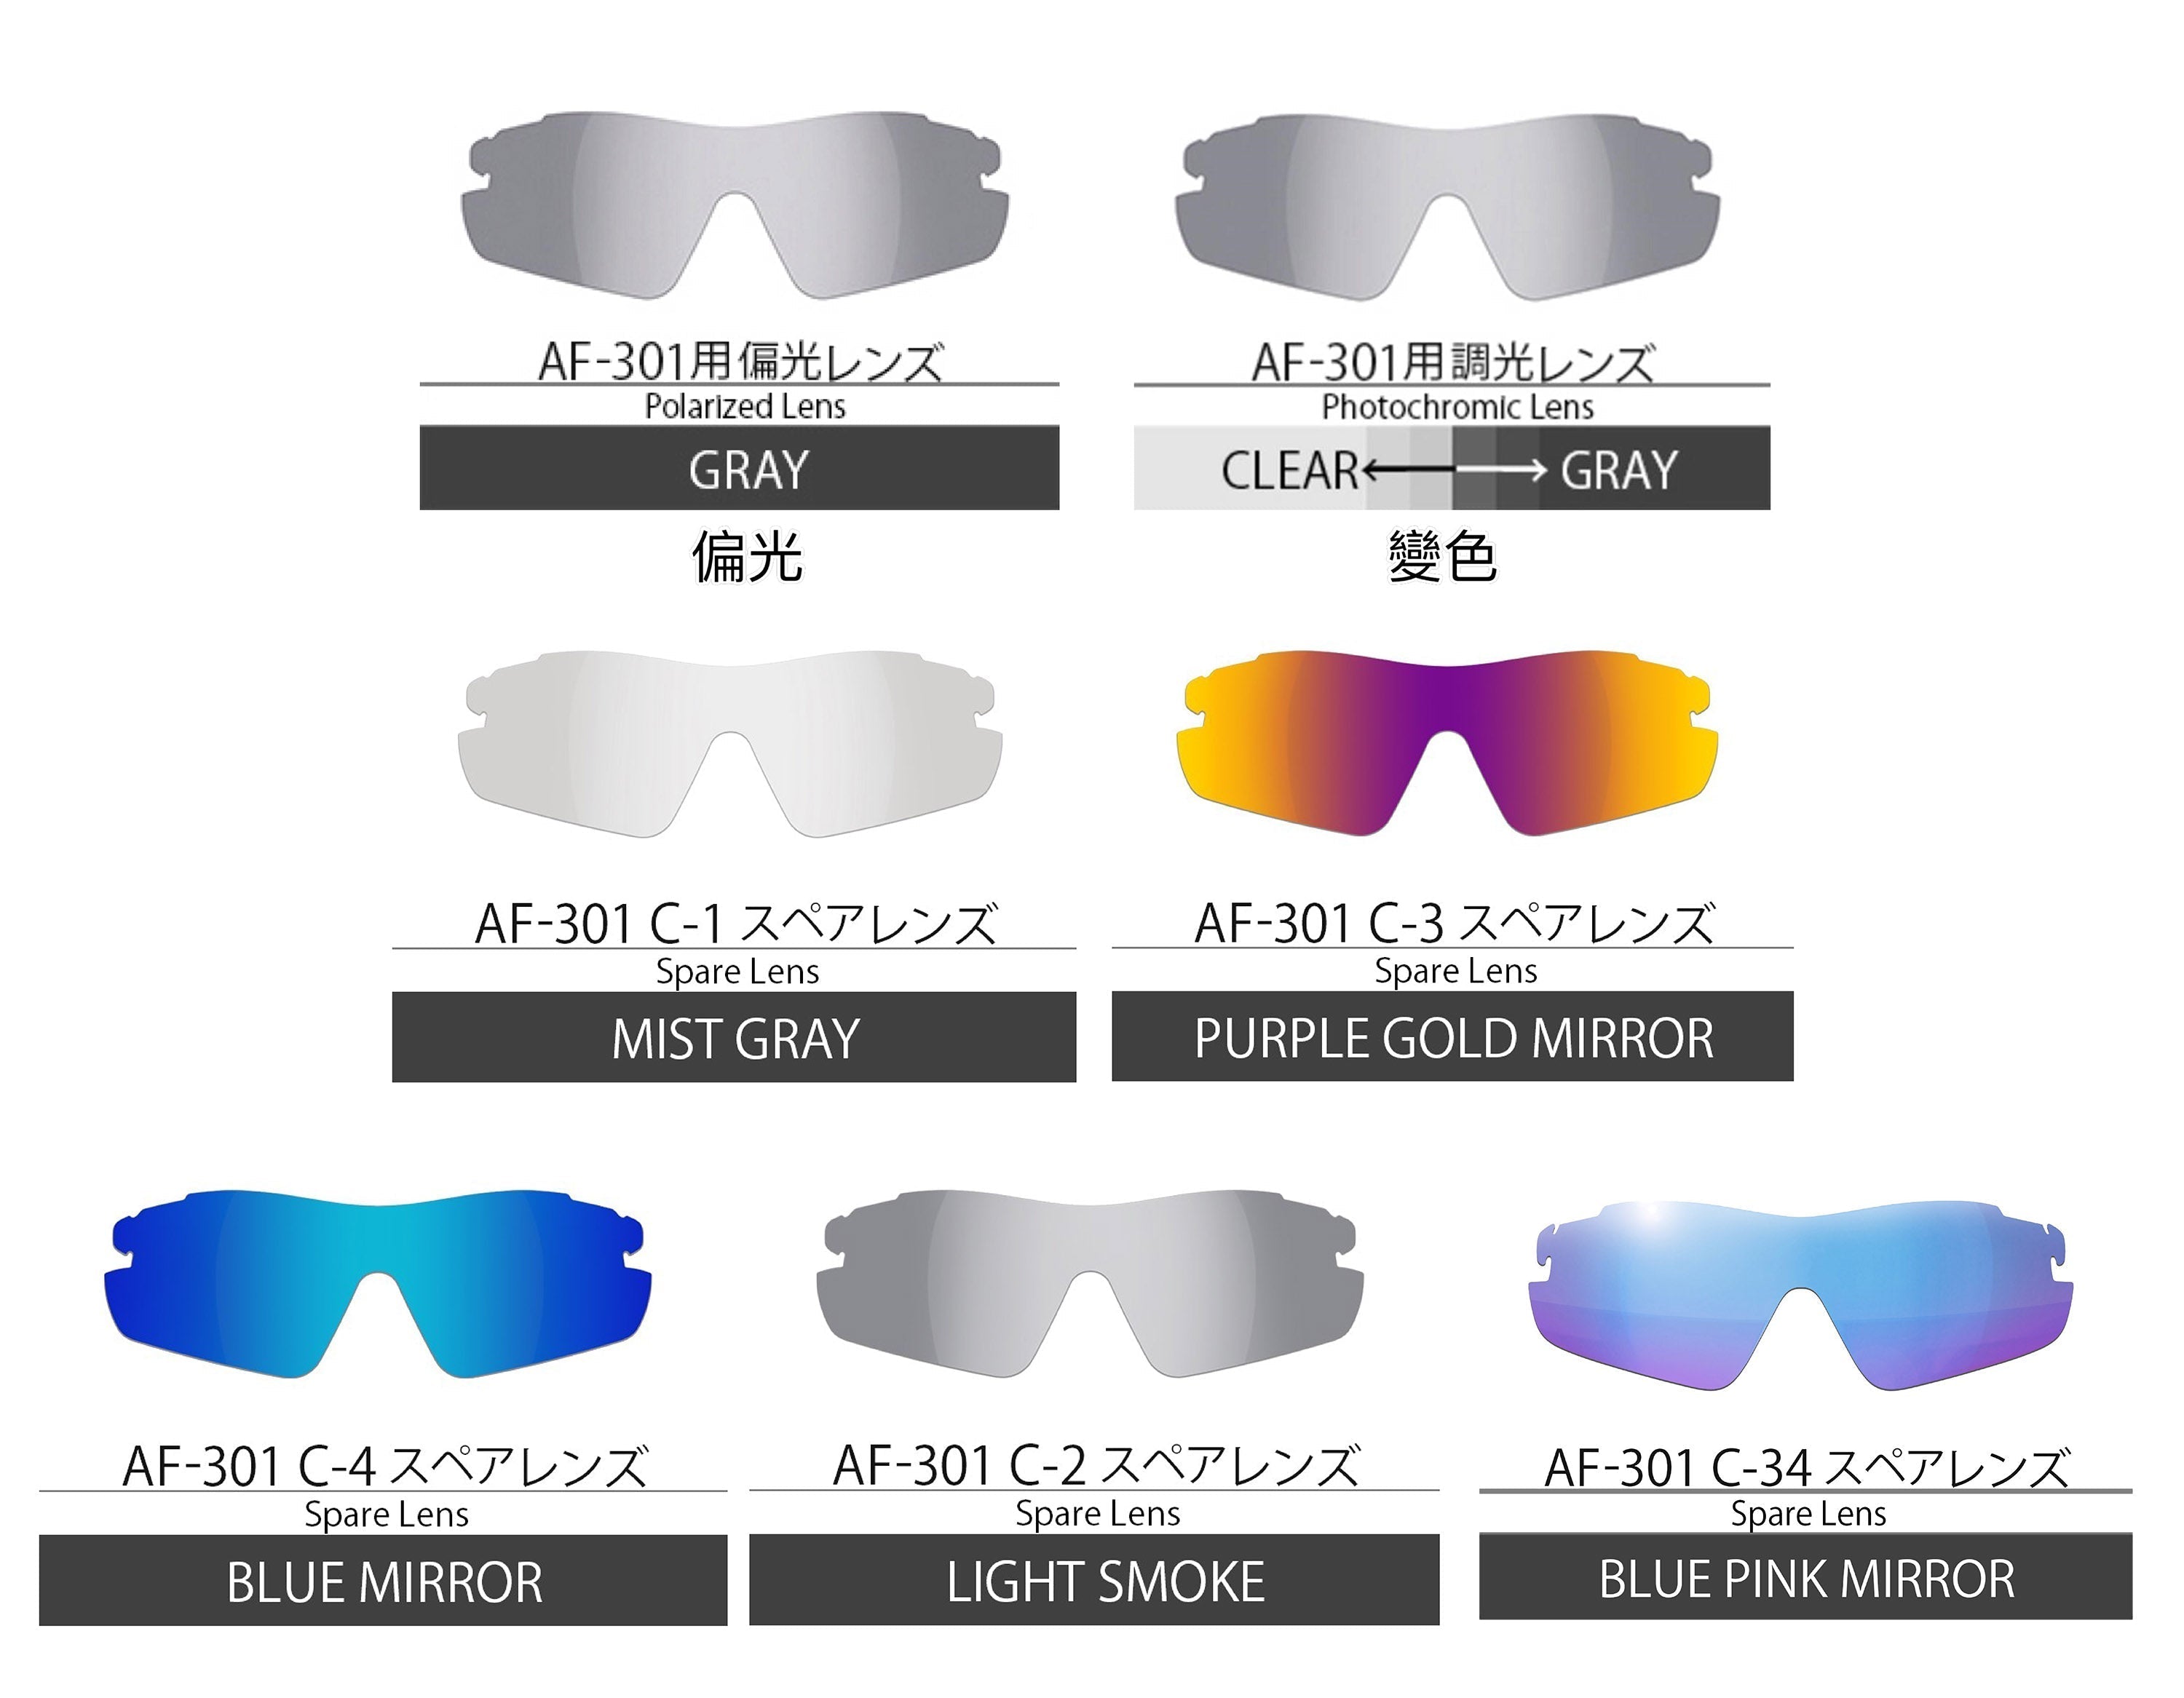 AirFly - AF301 C3( Polarized Gray Lens)【Pre-order Now】